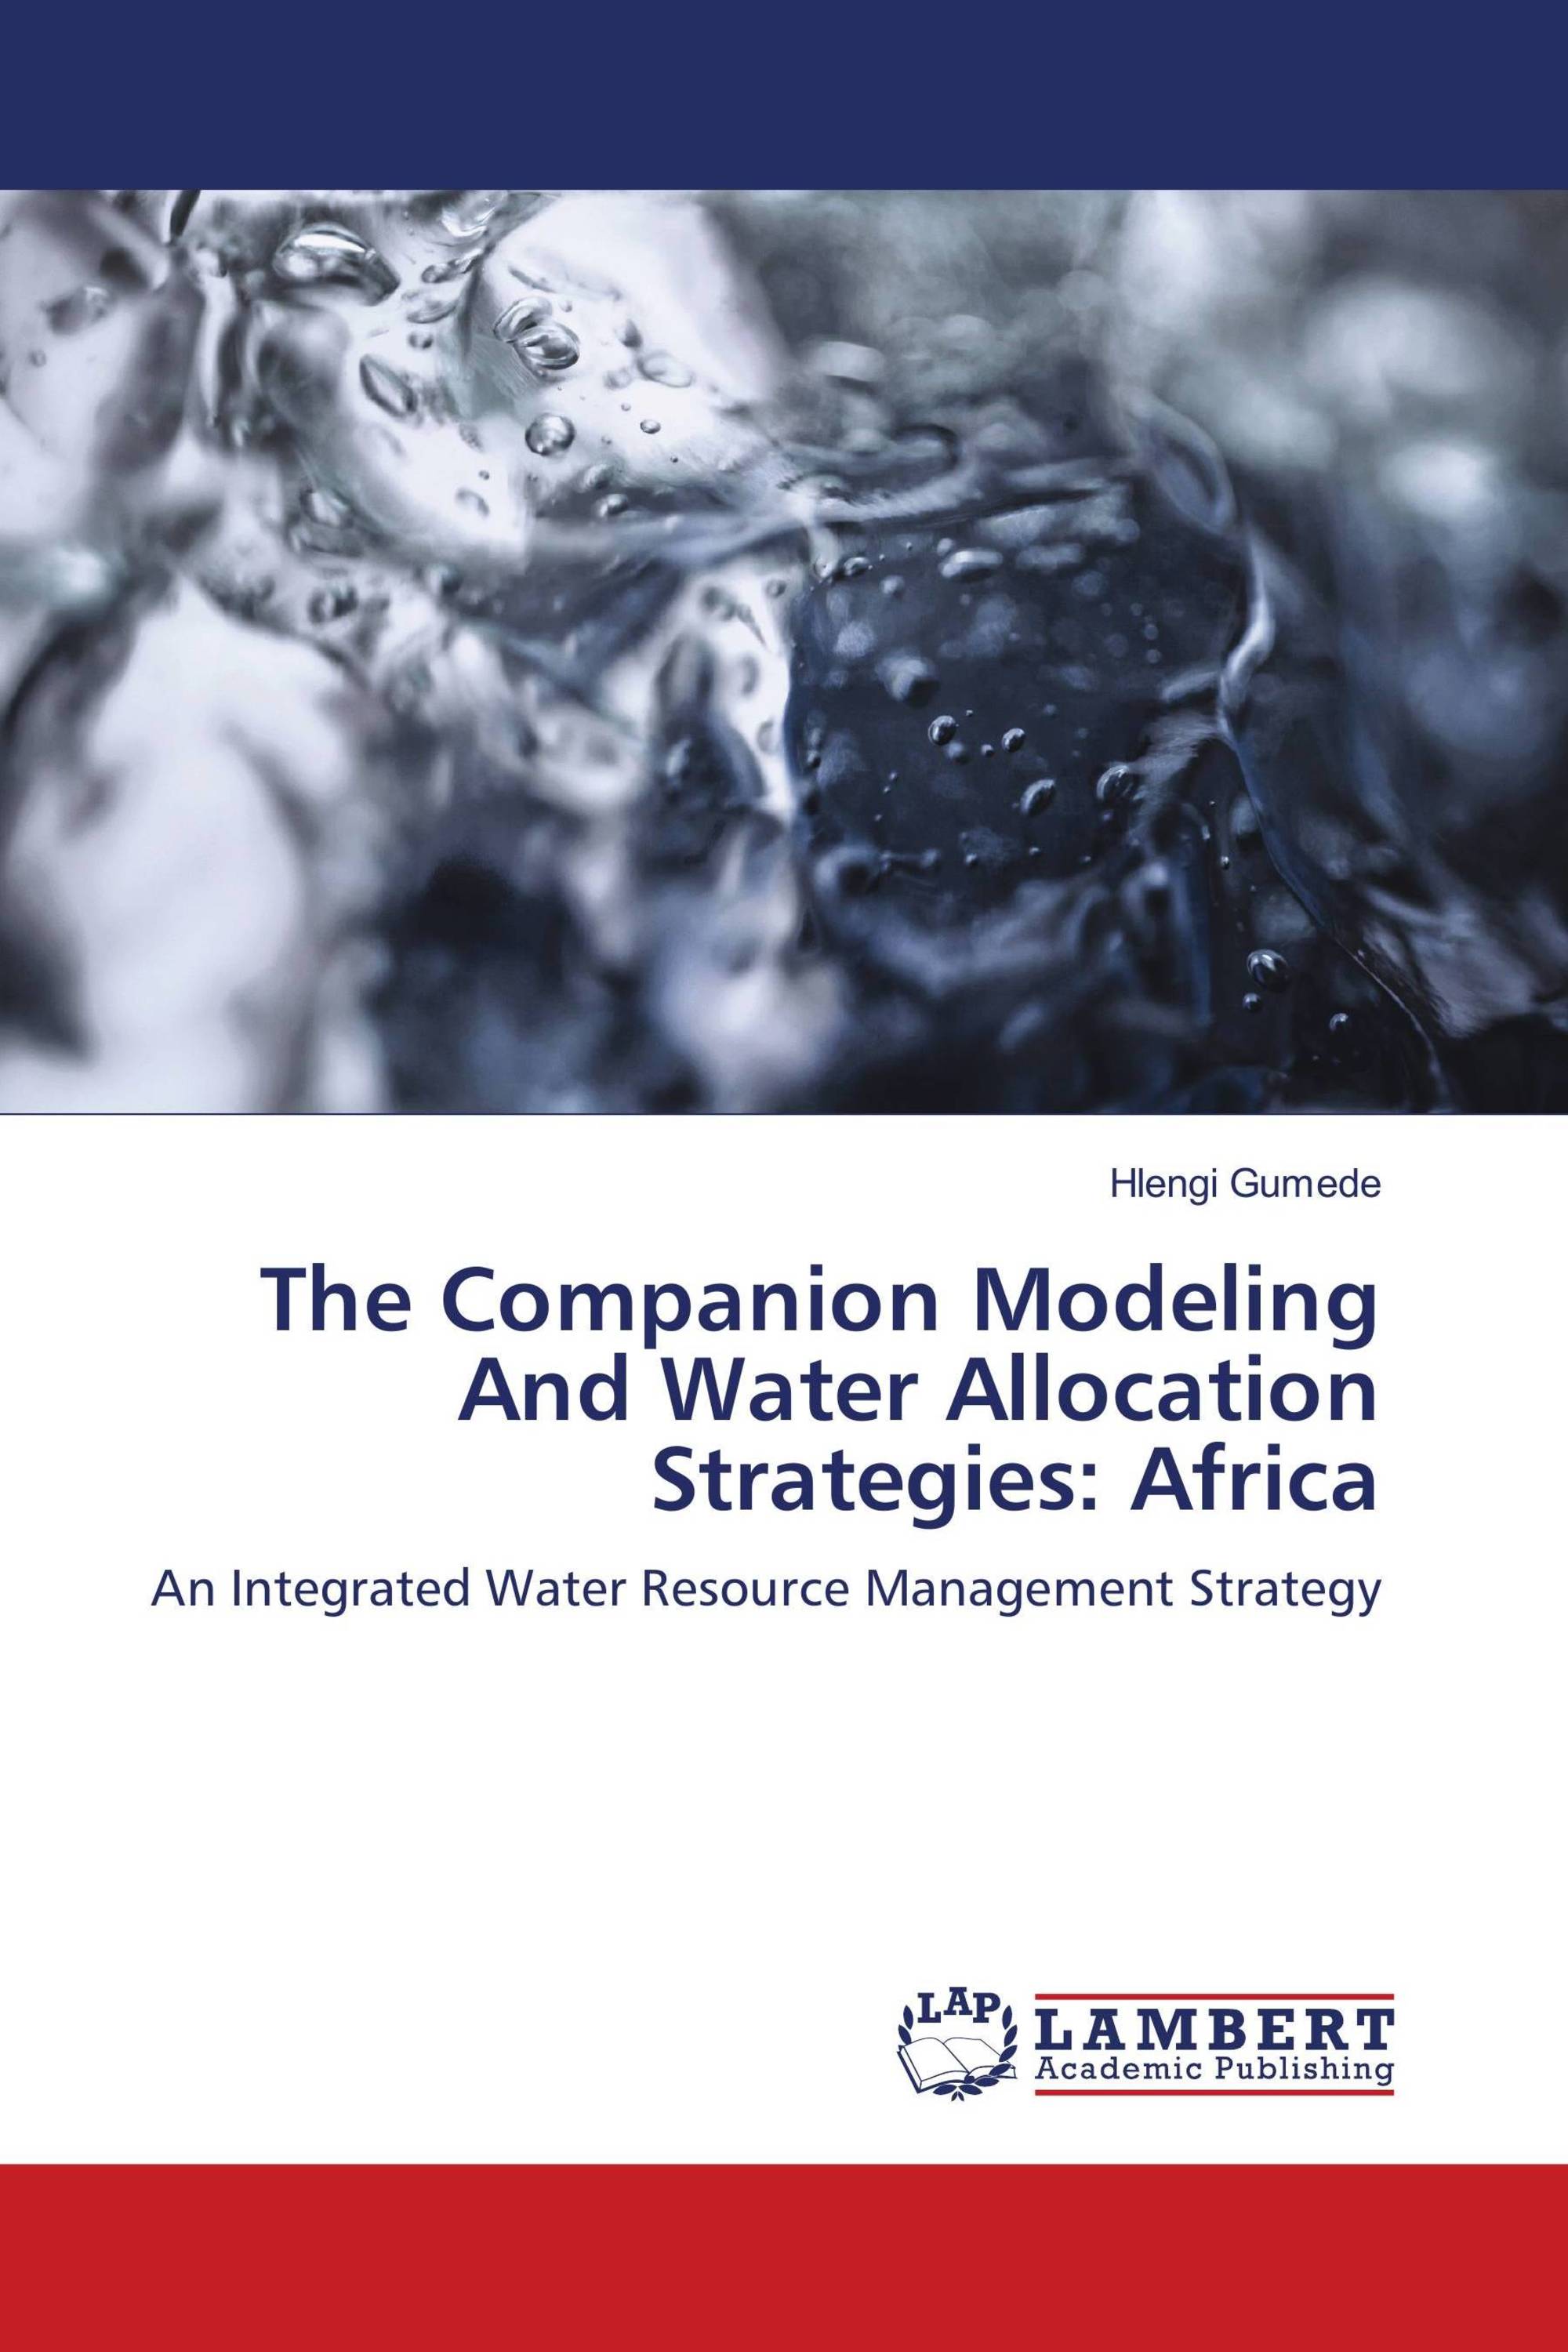 The Companion Modeling And Water Allocation Strategies: Africa